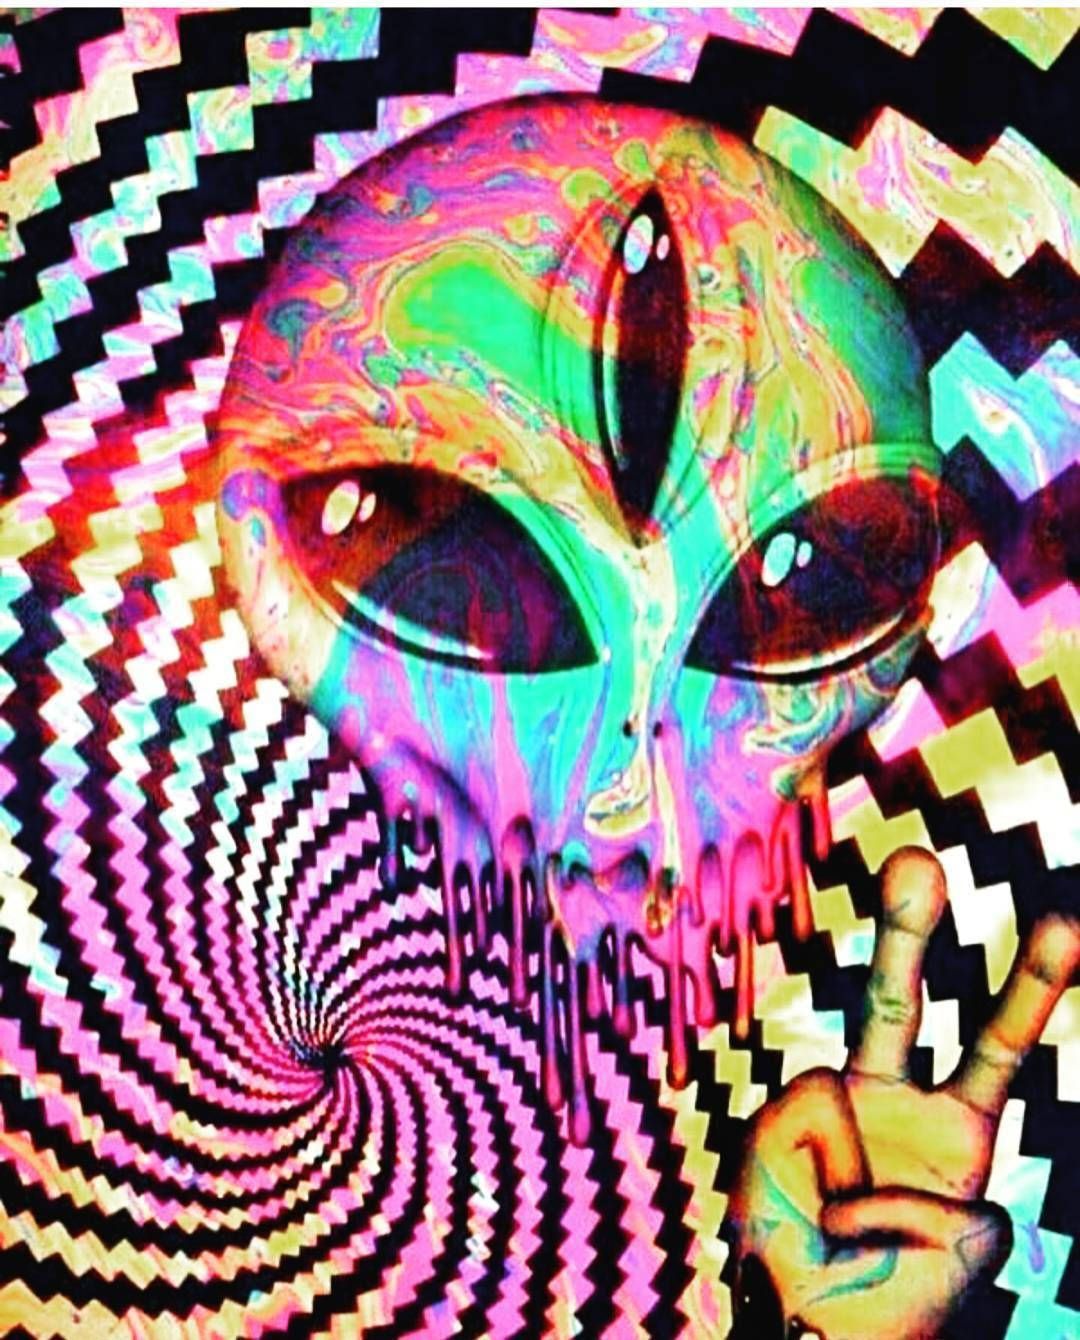 A colorful alien with a peace sign - Alien, trippy, graffiti